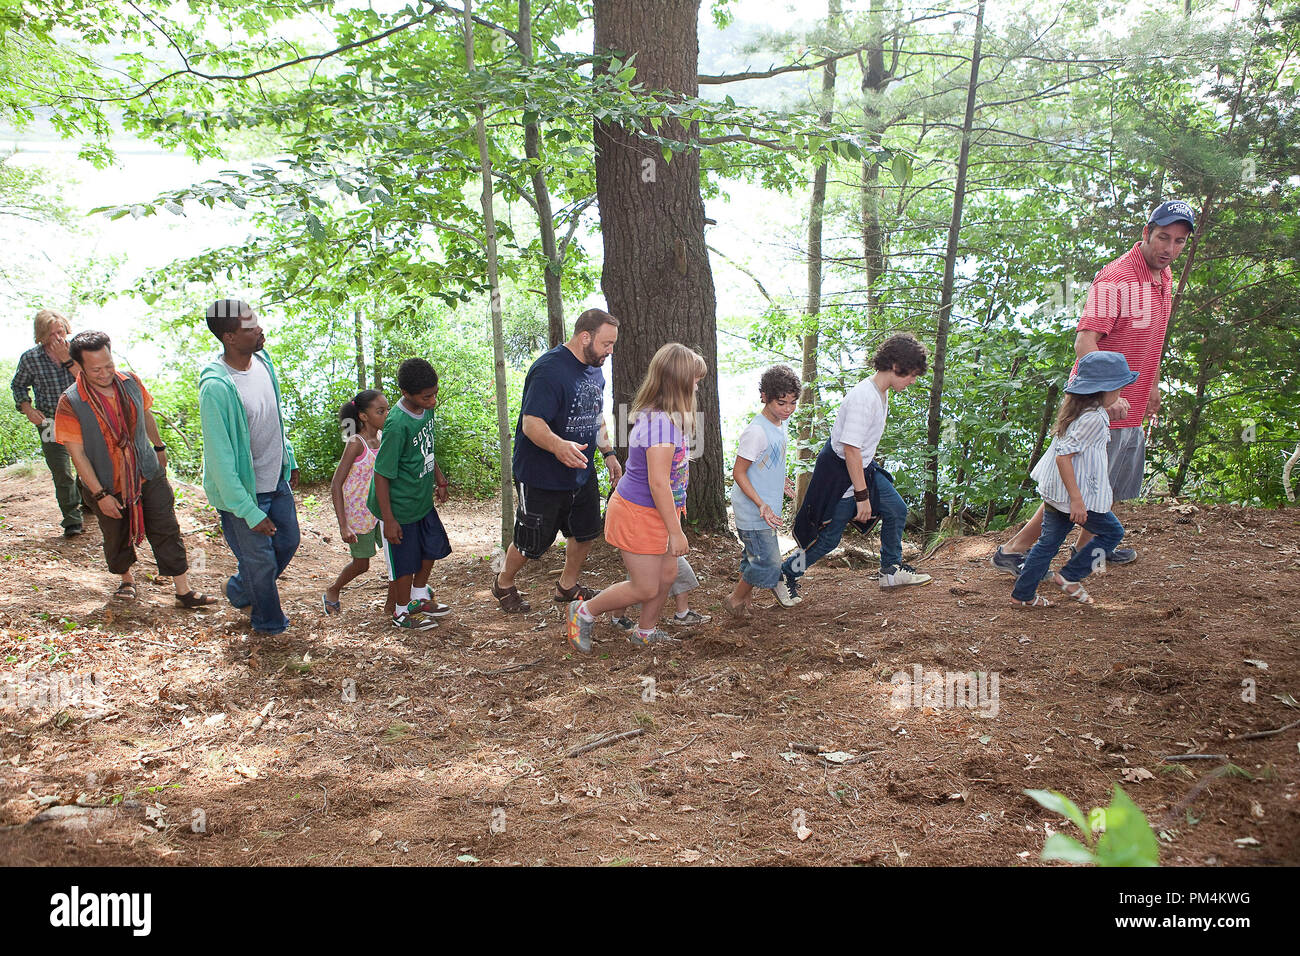 Lenny (Adam Sandler) walks through the woods with his daughter Becky (Alexys Nicole Sanger), sons Greg (Jake Goldberg) and Keithie (Cameron Boyce), Donna Lamonsoff (Ada-Nicole Sanger), Bean Lamonsoff (Frank Gingerich), Eric Lamonsoff (Kevin James), Andre McKenzie (Nadji Jeter), Kurt (Chris Rock), Charlotte (China Anne McClain), Rob (Rob Schneider) and Marcus Higgins (David Spade) towards the rope swing in Columbia Pictures' GROWN UPS. Stock Photo